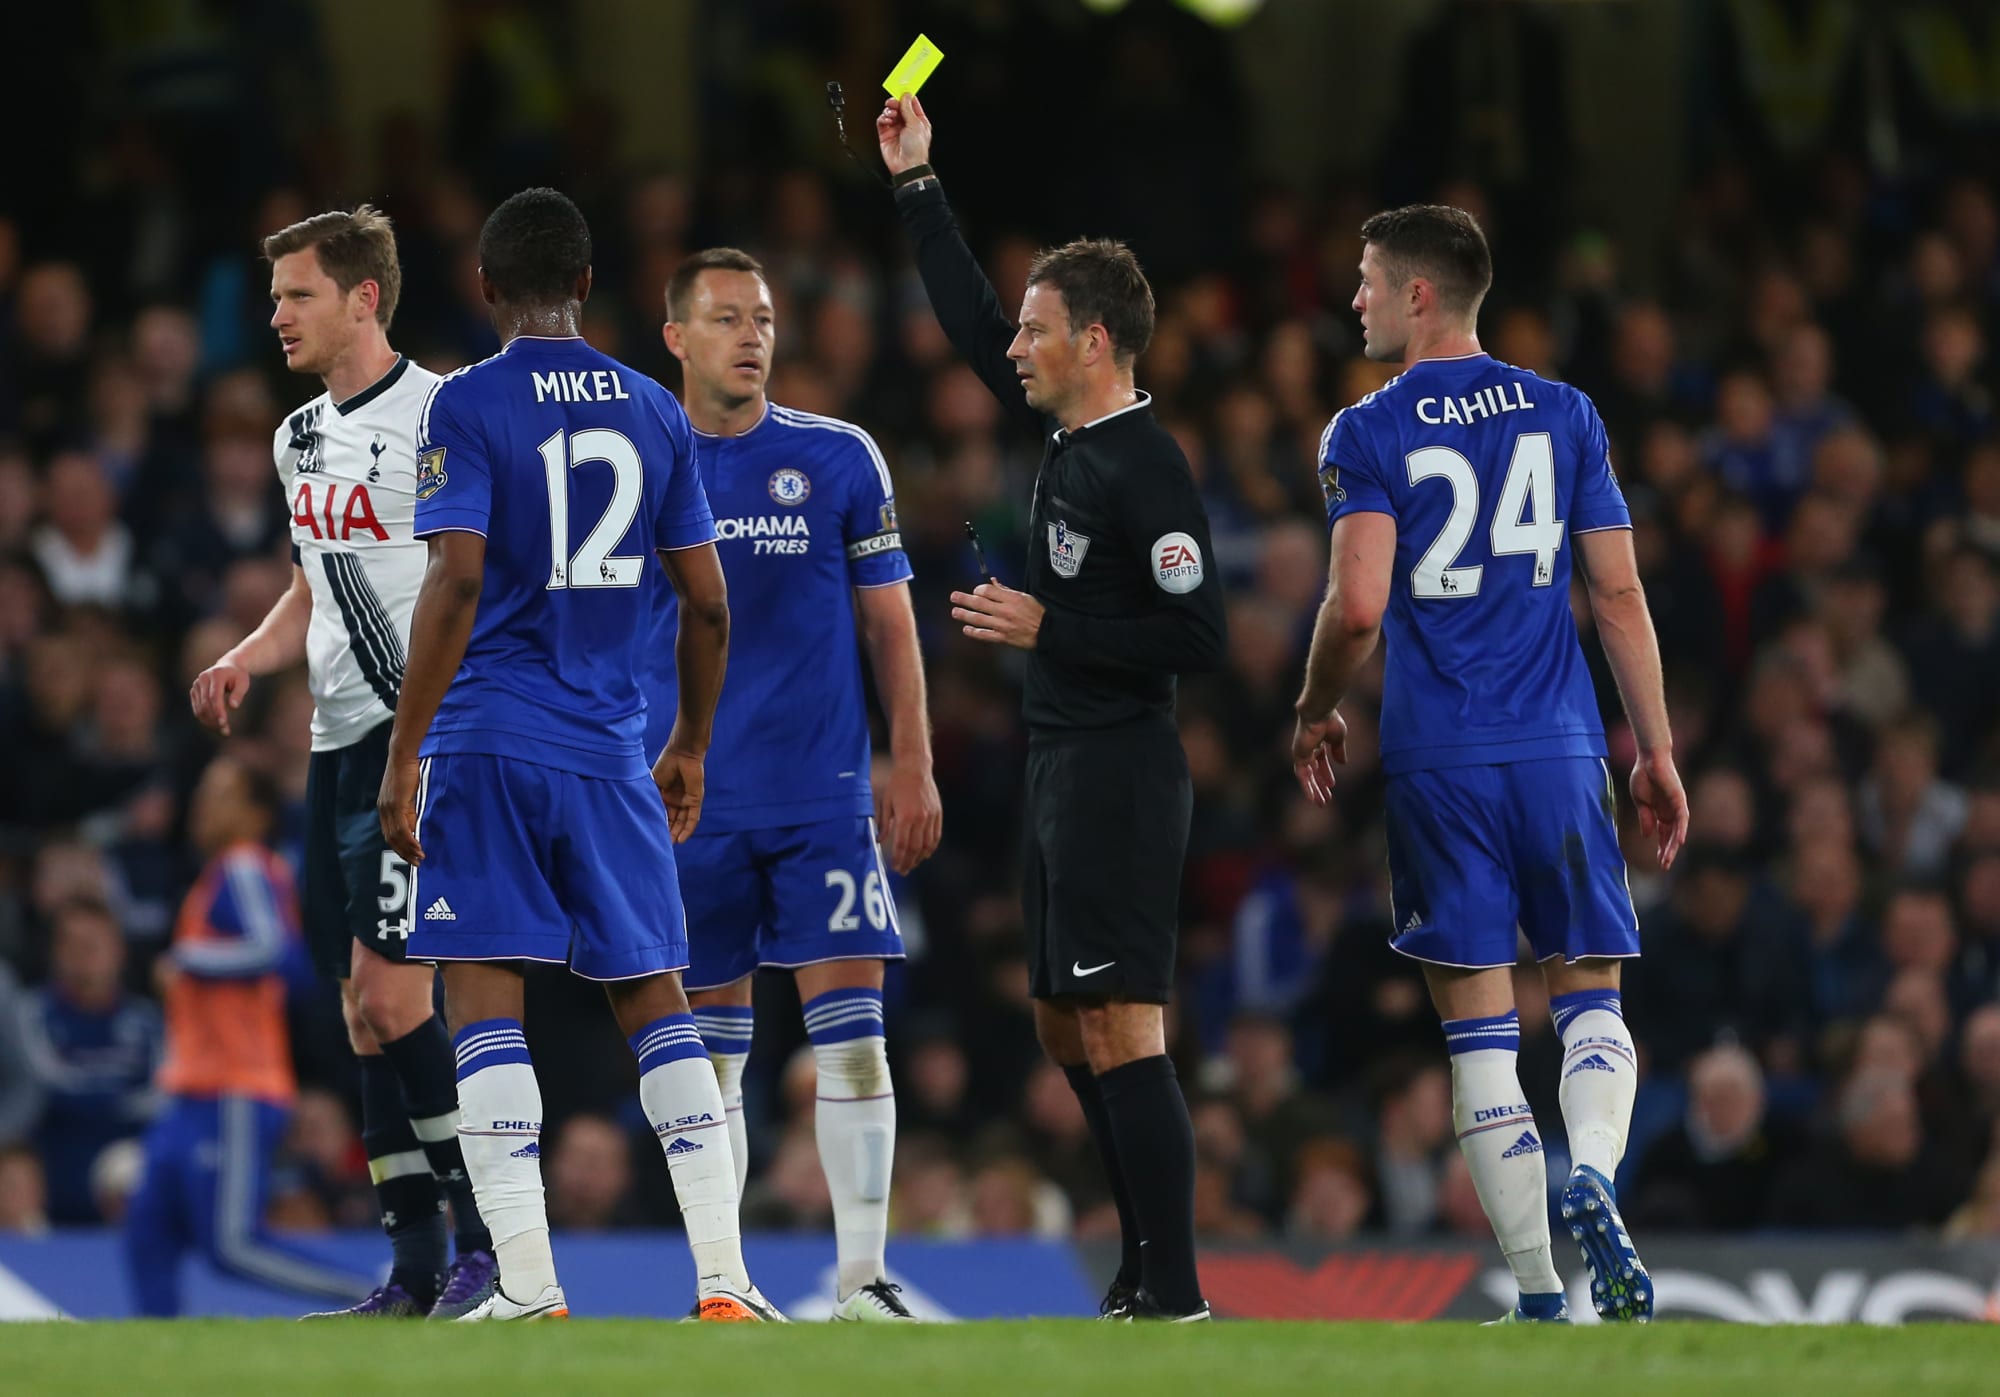 Tottenham may face disciplinary repercussions after Chelsea FC draw